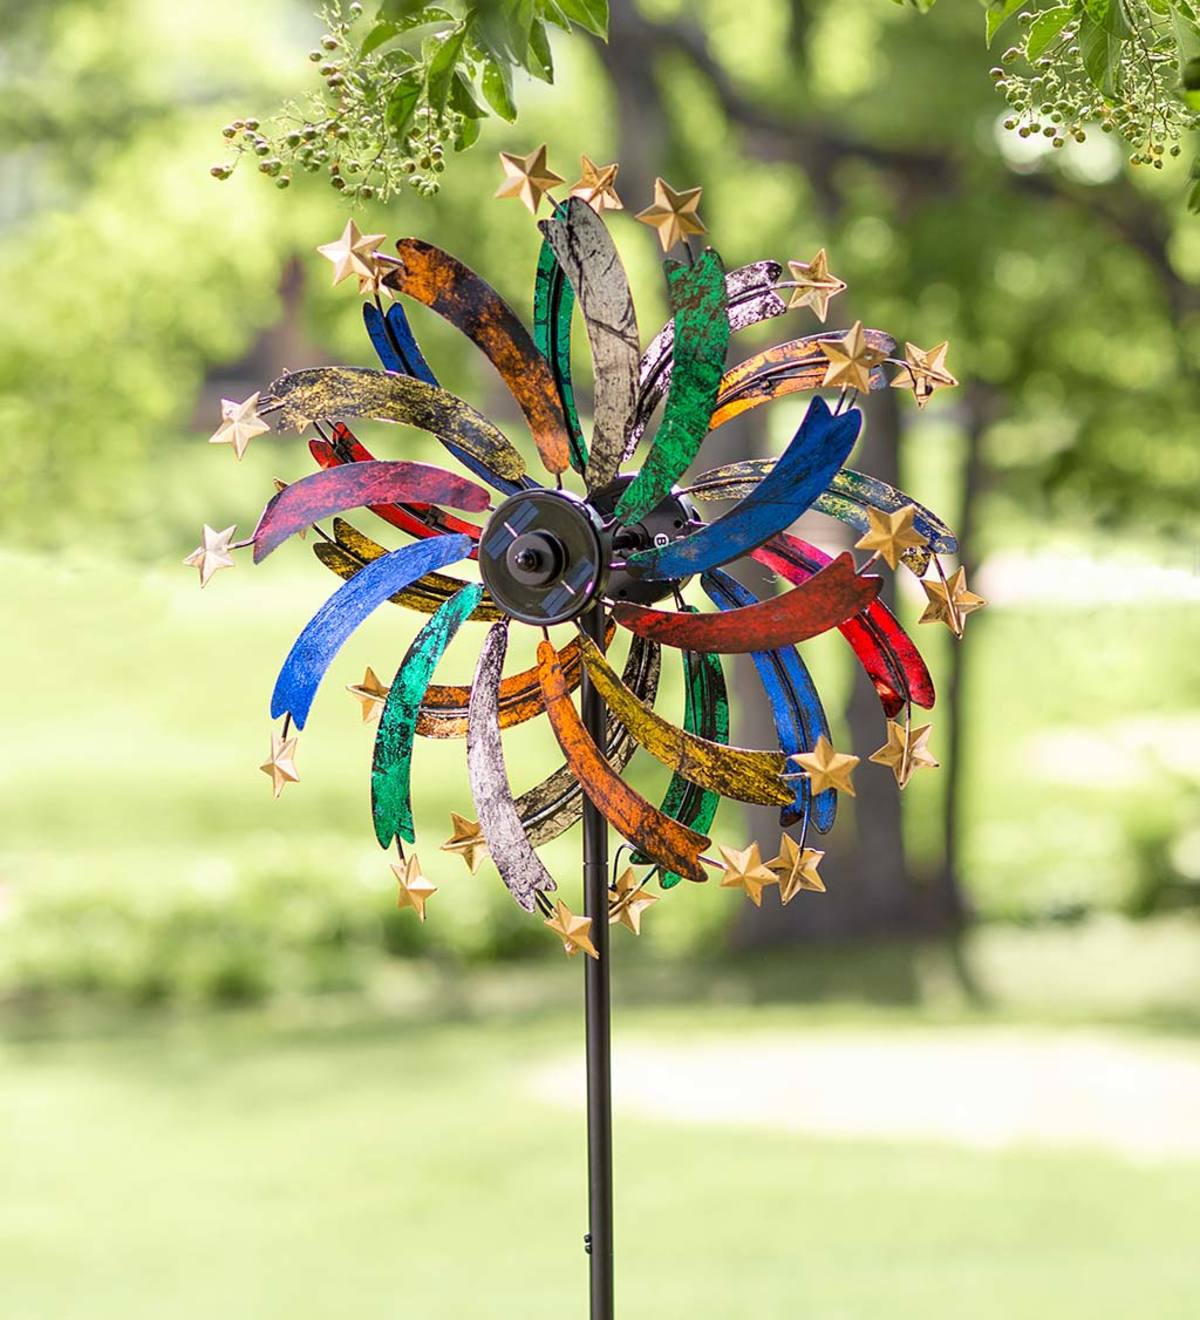 Stainless Steel Wind Spinner Worth Gift Indoor Outdoor Garden Decoration Crafts Ornaments Wind Spinners for Yard and Garden Crystal Suncatcher with Wing Wind Spinner 